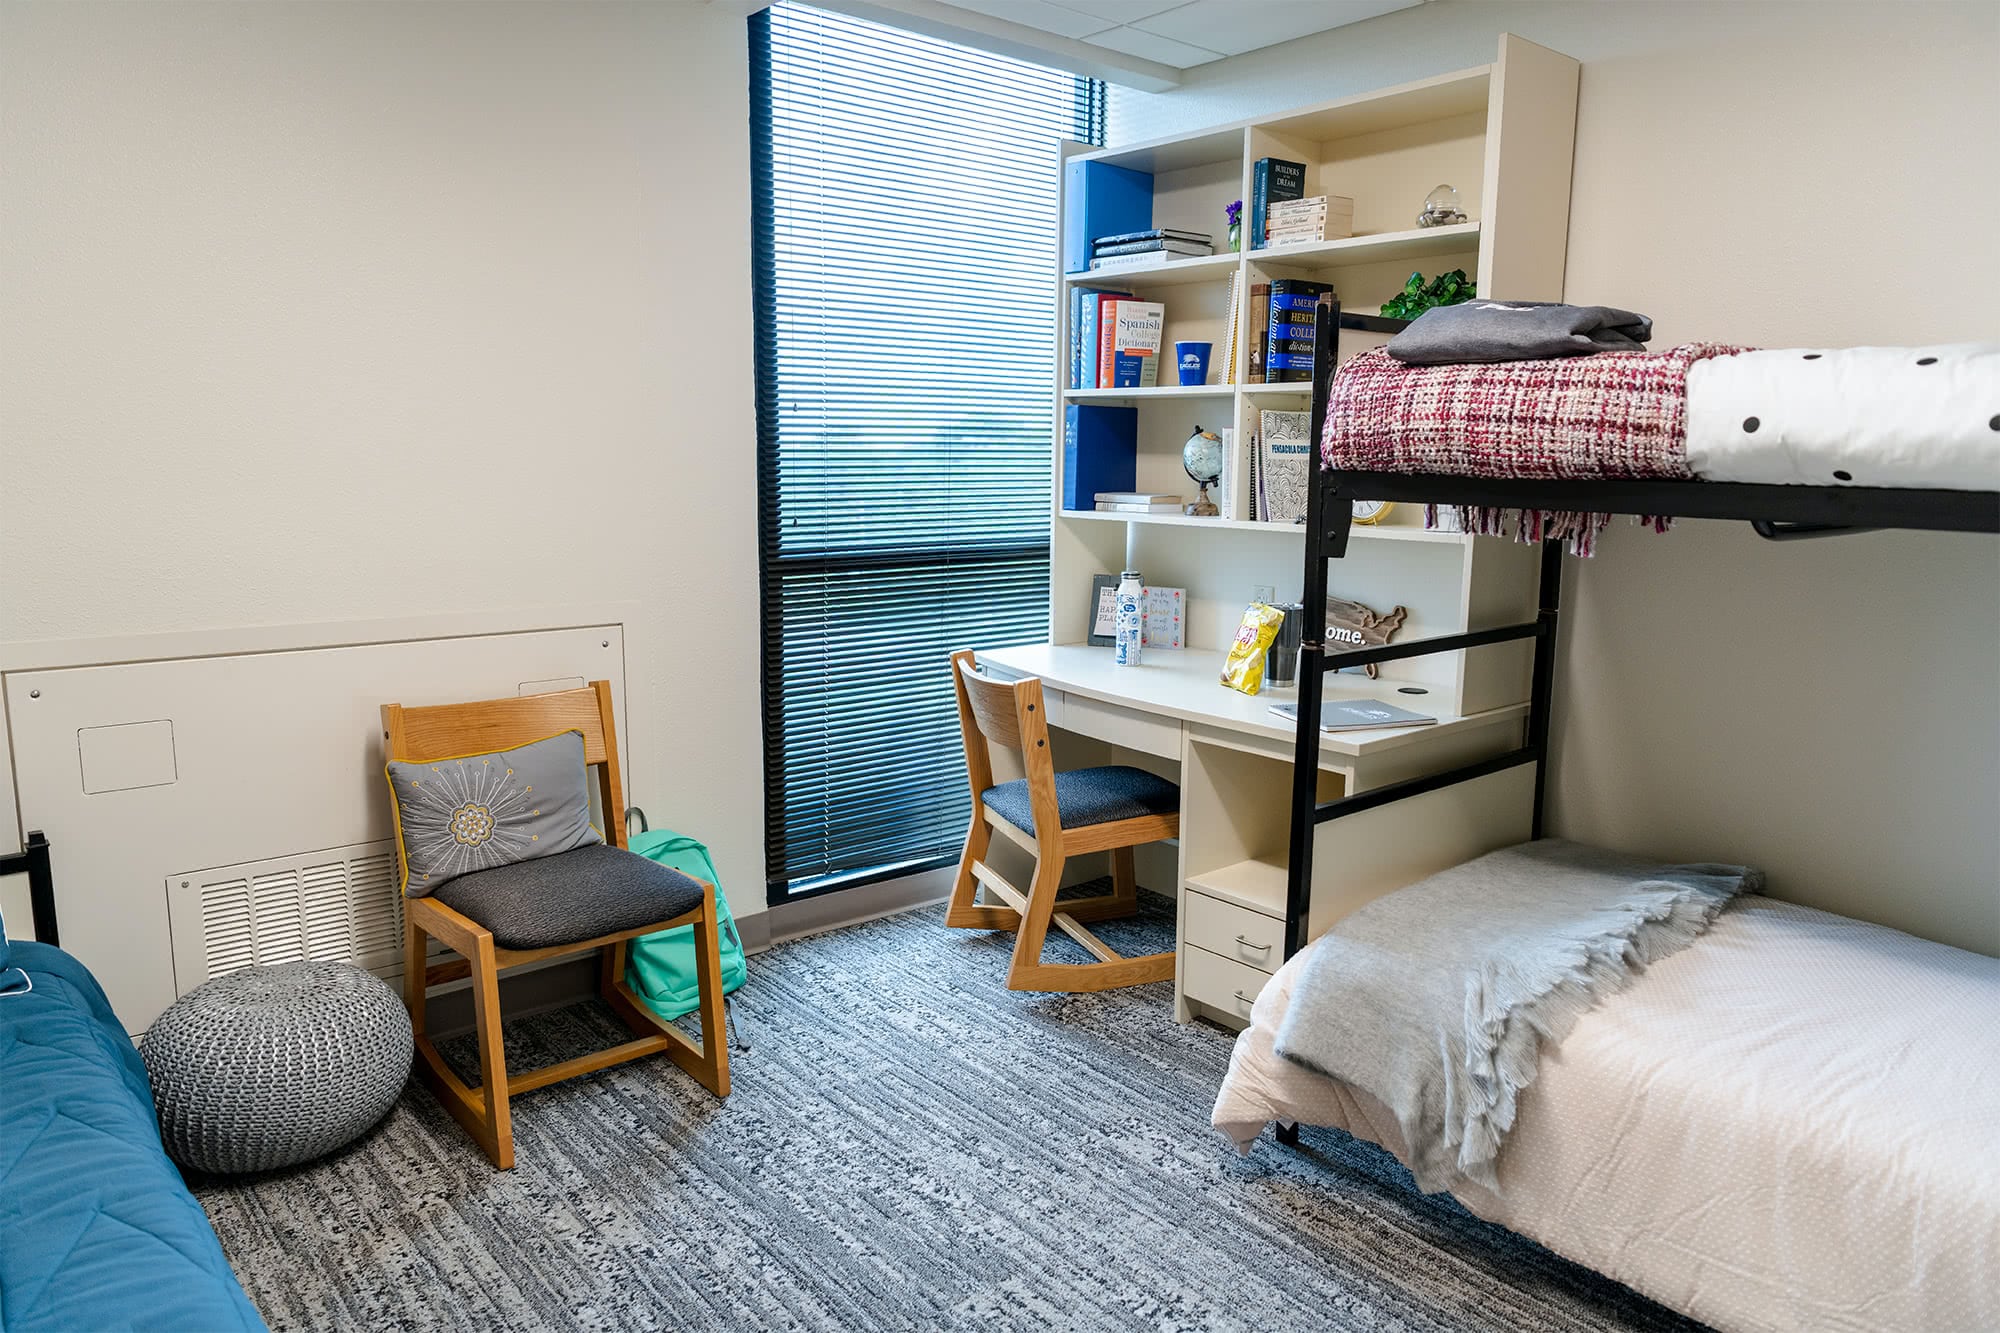 Griffith Tower dorm room.